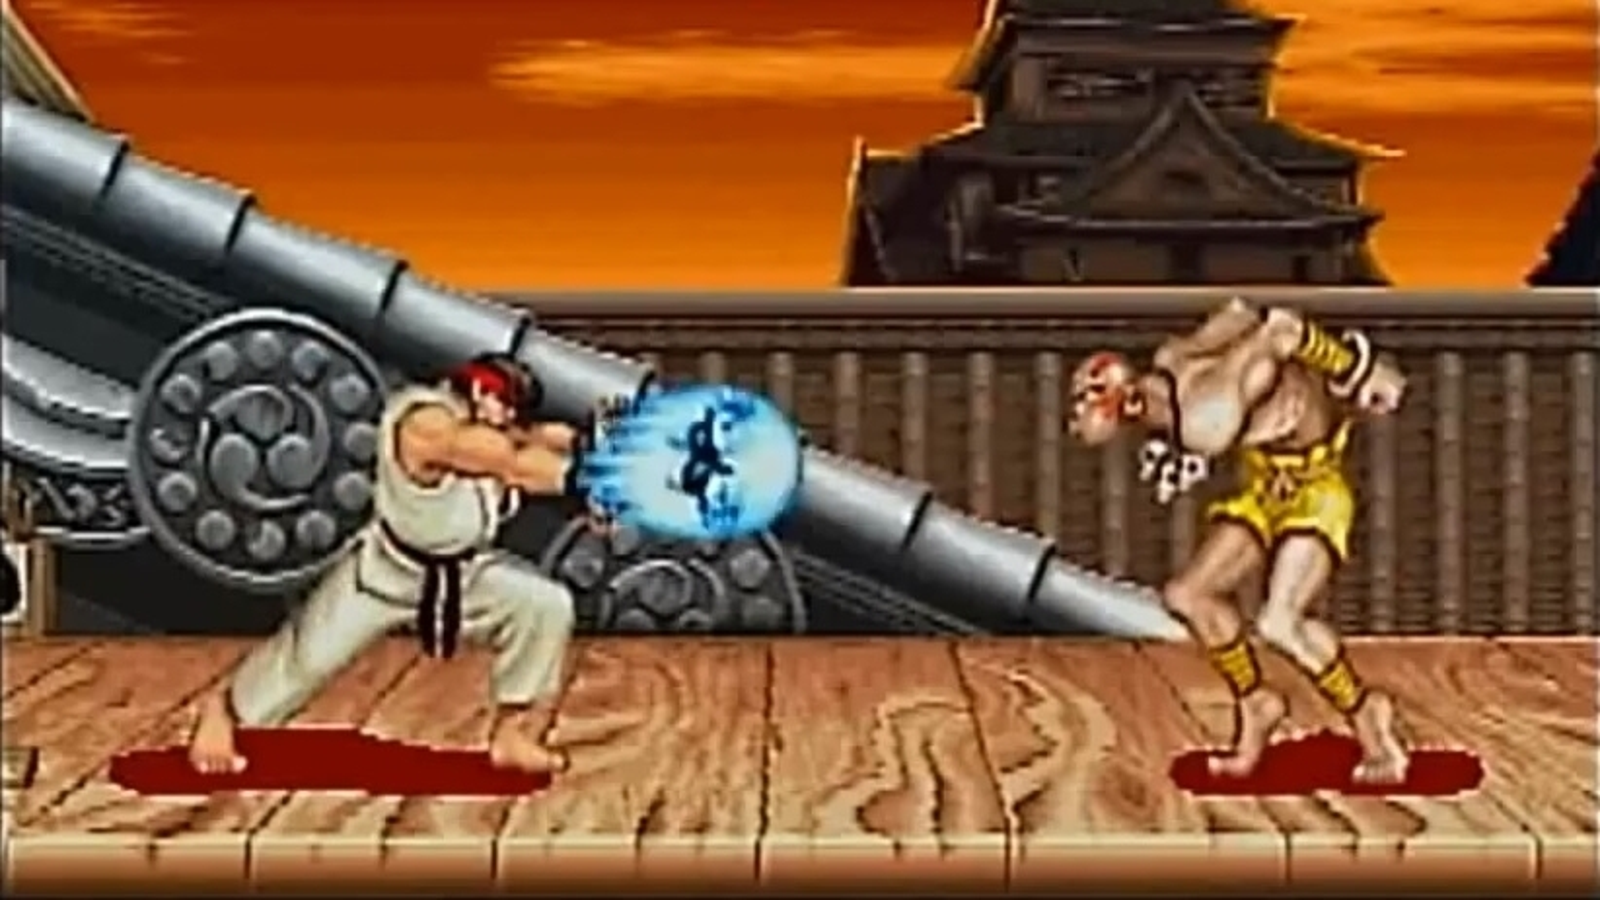 Street Fighter 2 is a terrible fighting game by today's standards